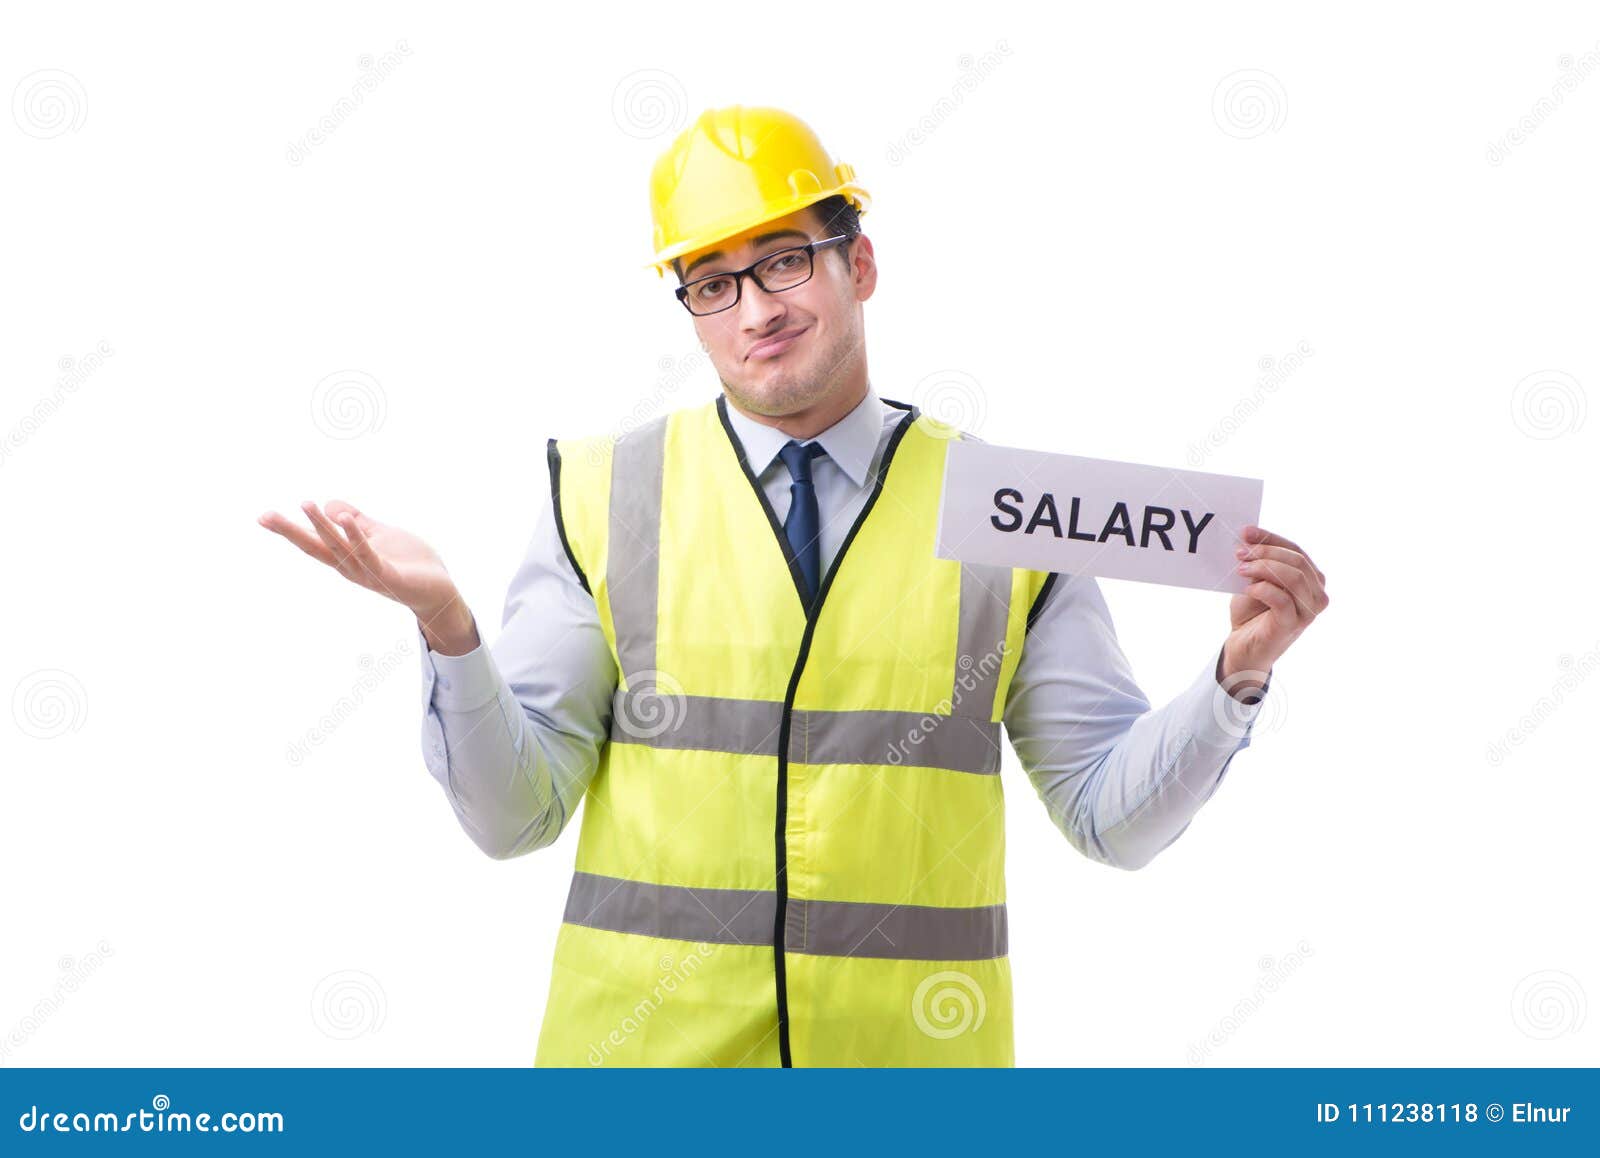 Construction Supervisor Asking For Higher Salary Isolated On Whi Stock